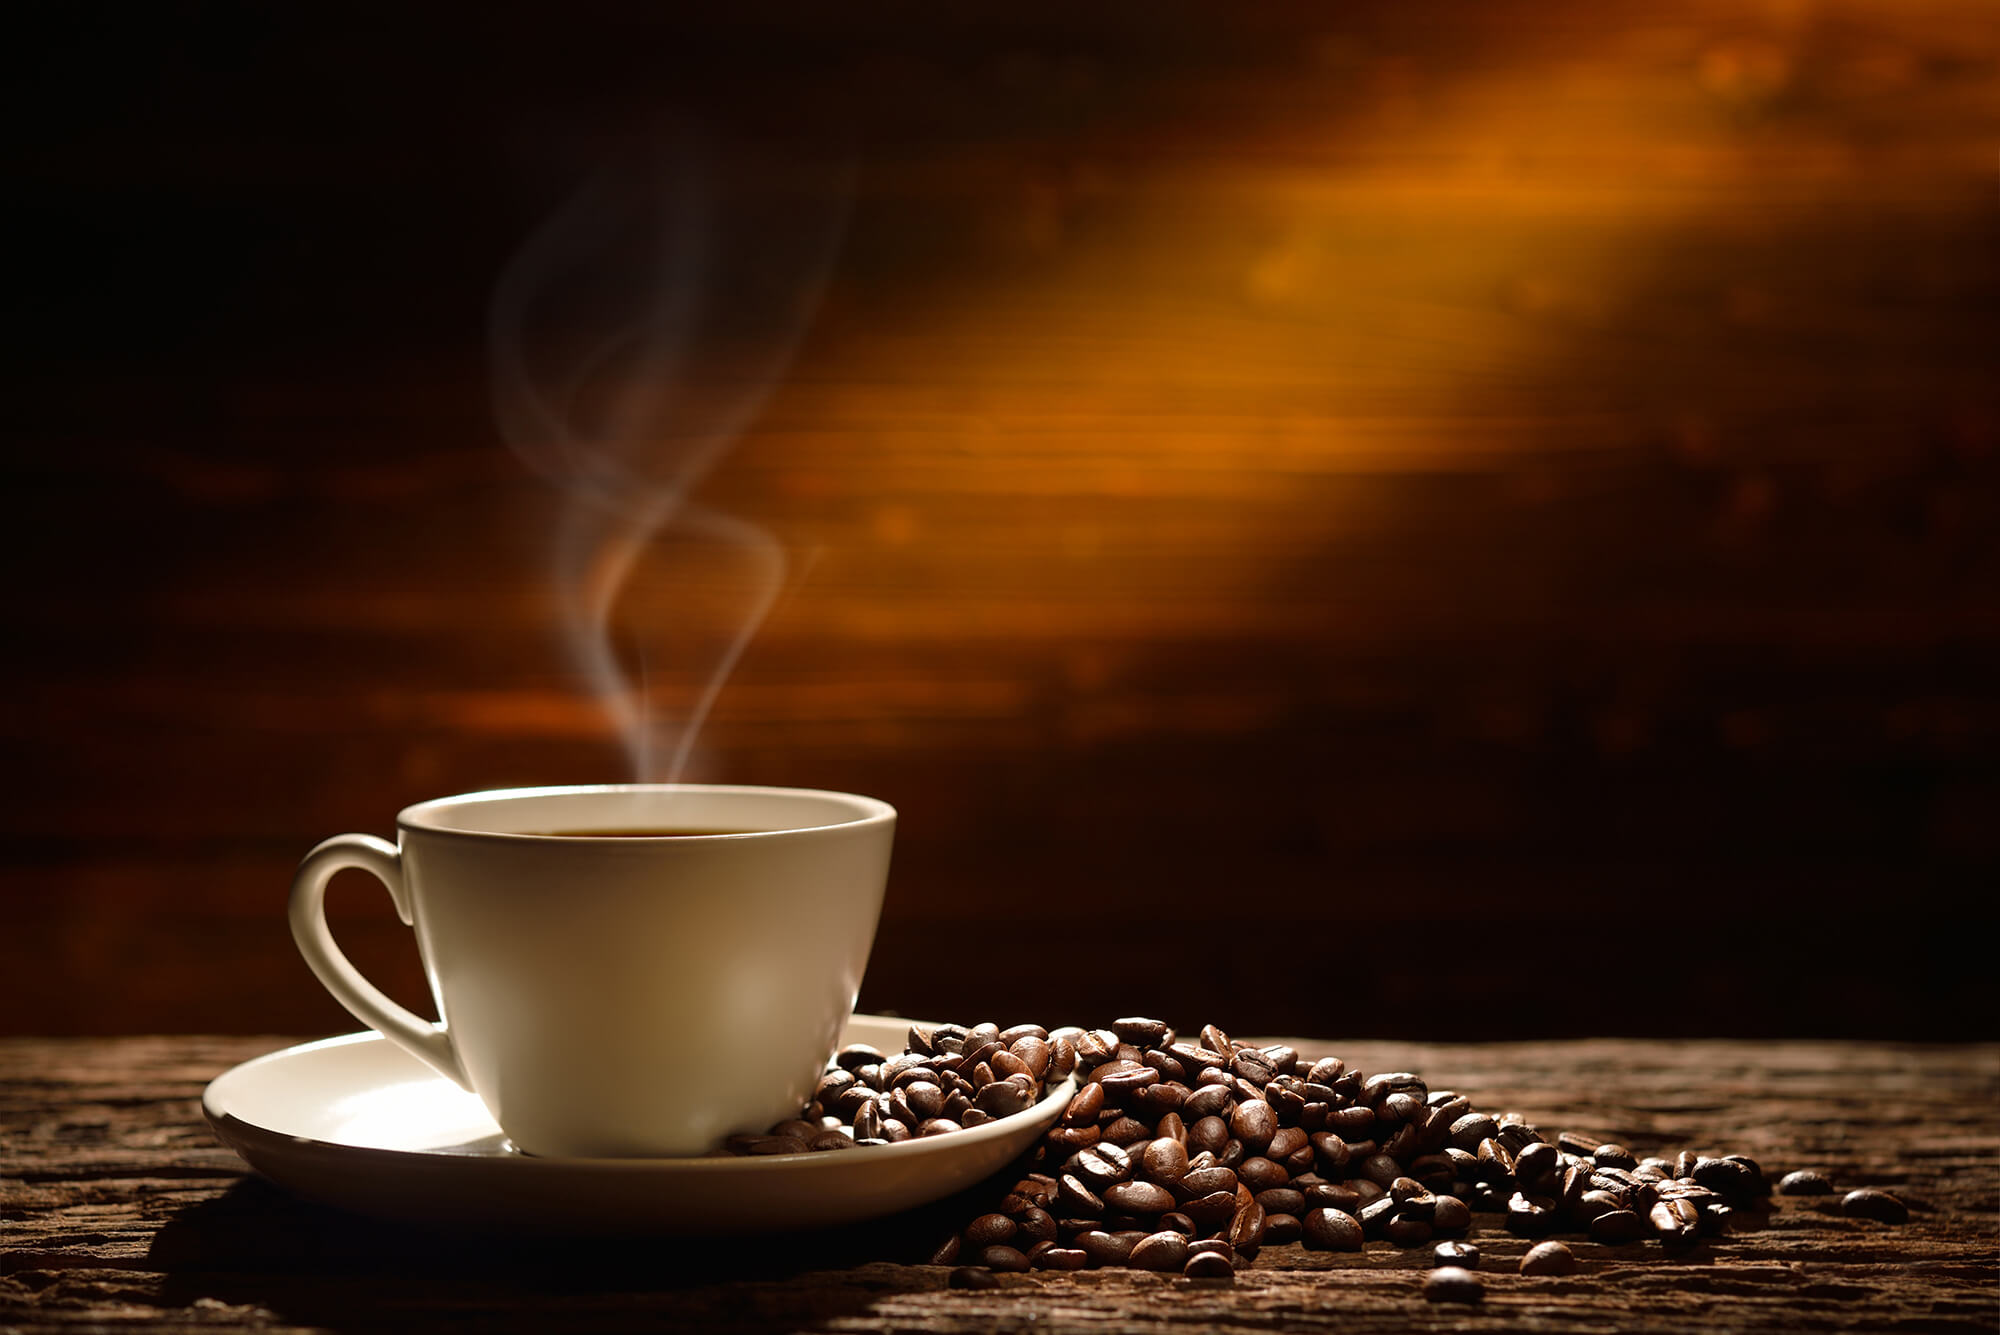 Does a cup of coffee improve the convergent thing